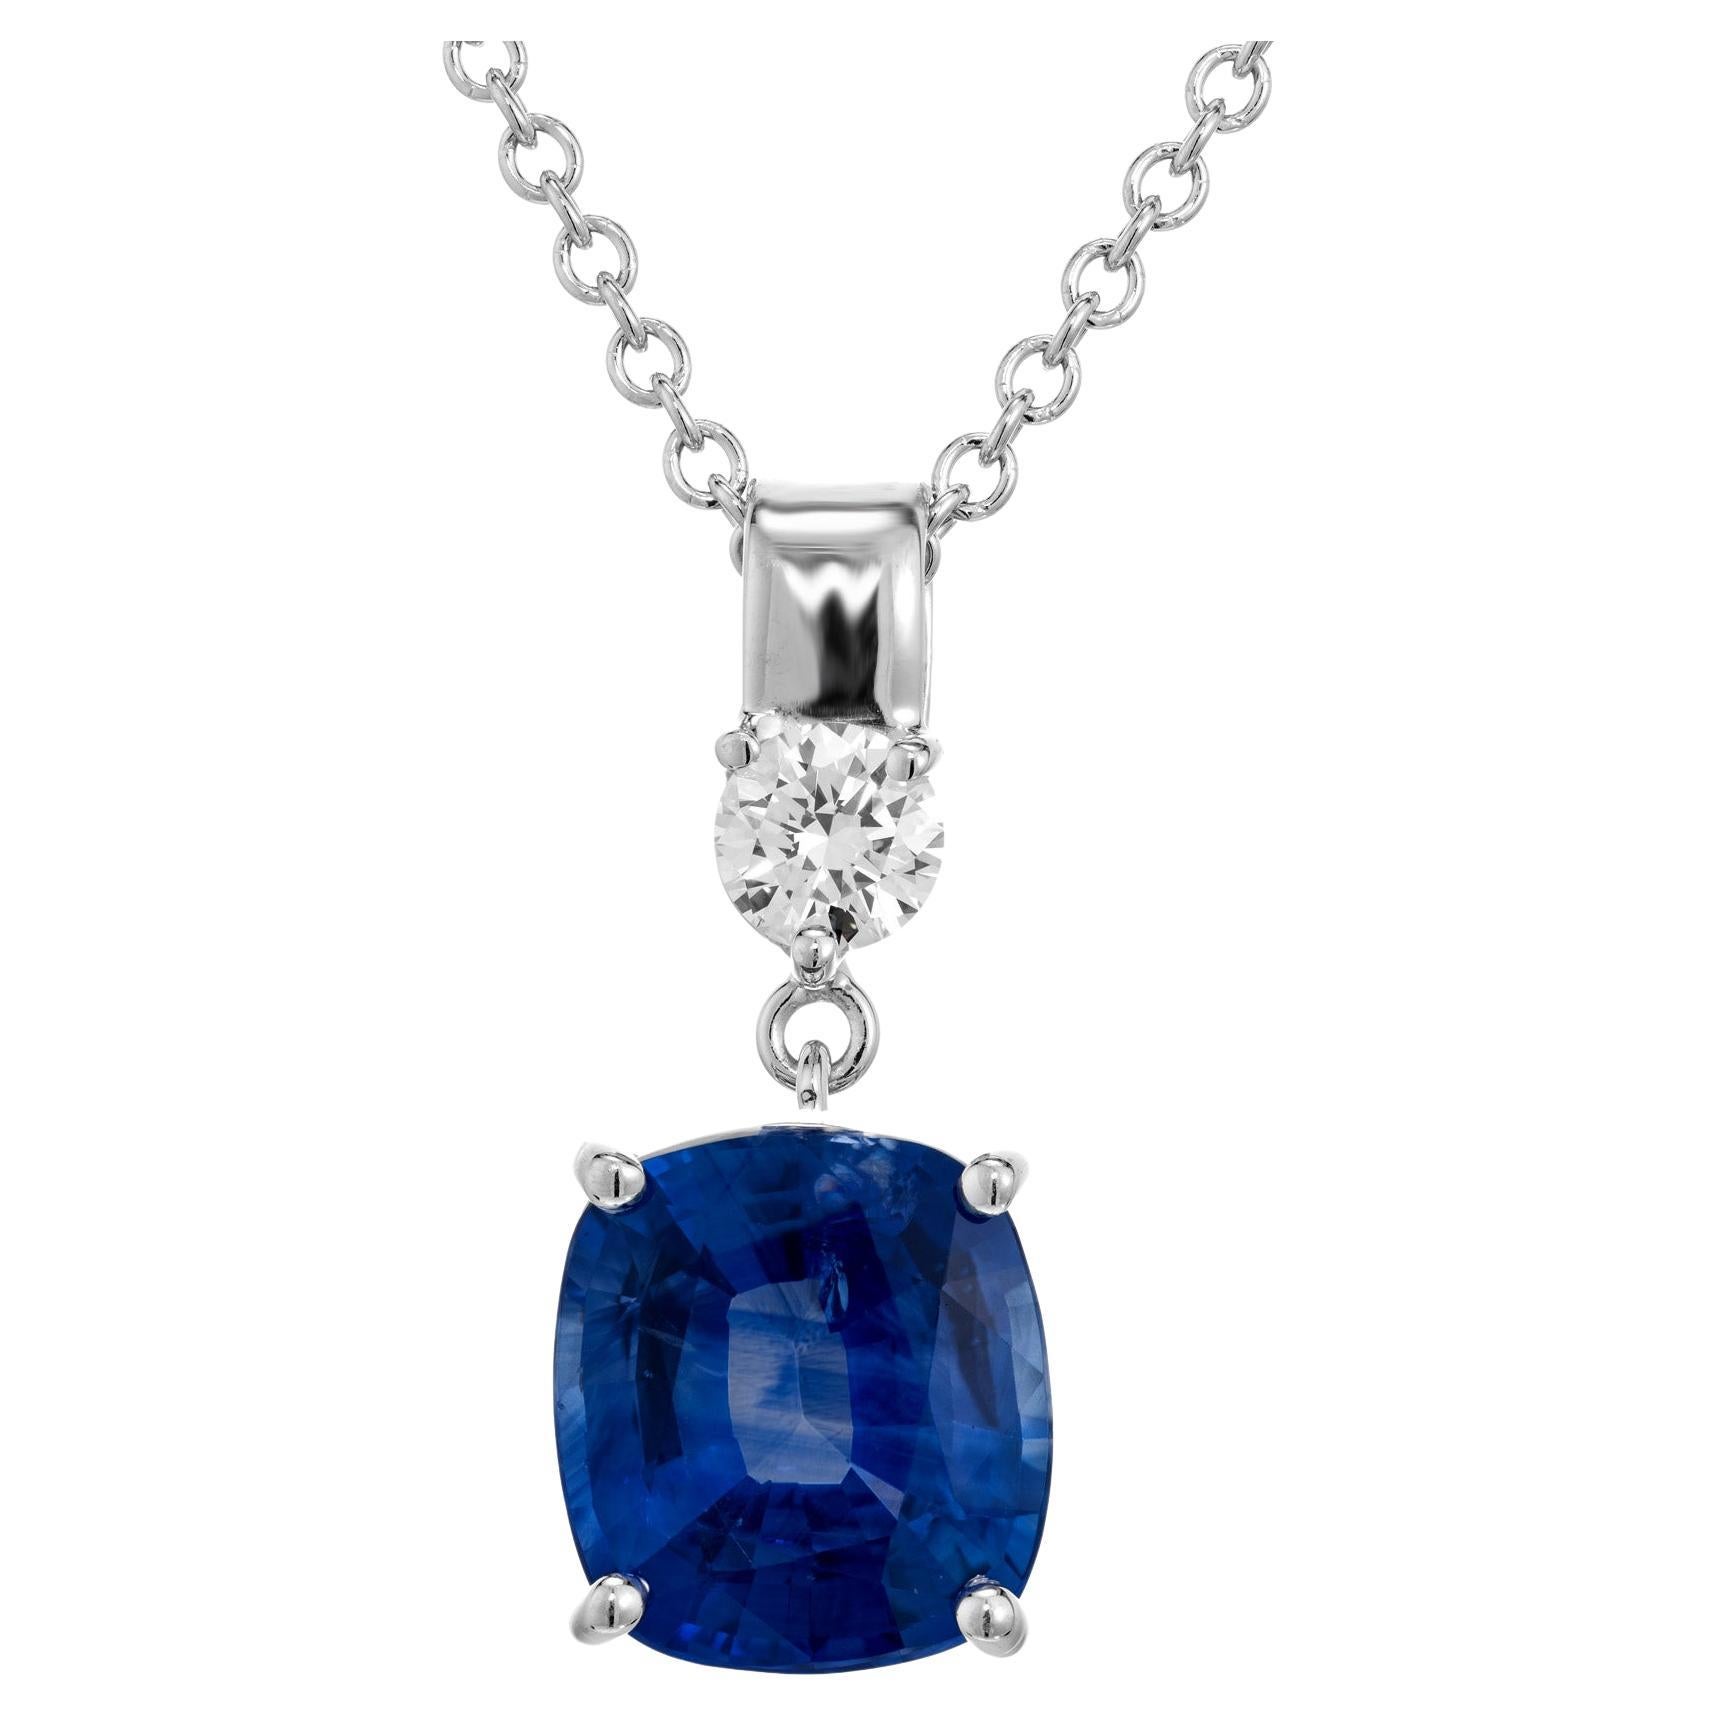 Peter Suchy GIA Certified 1.95 Carat Sapphire Diamond Pendant Necklace  For Sale